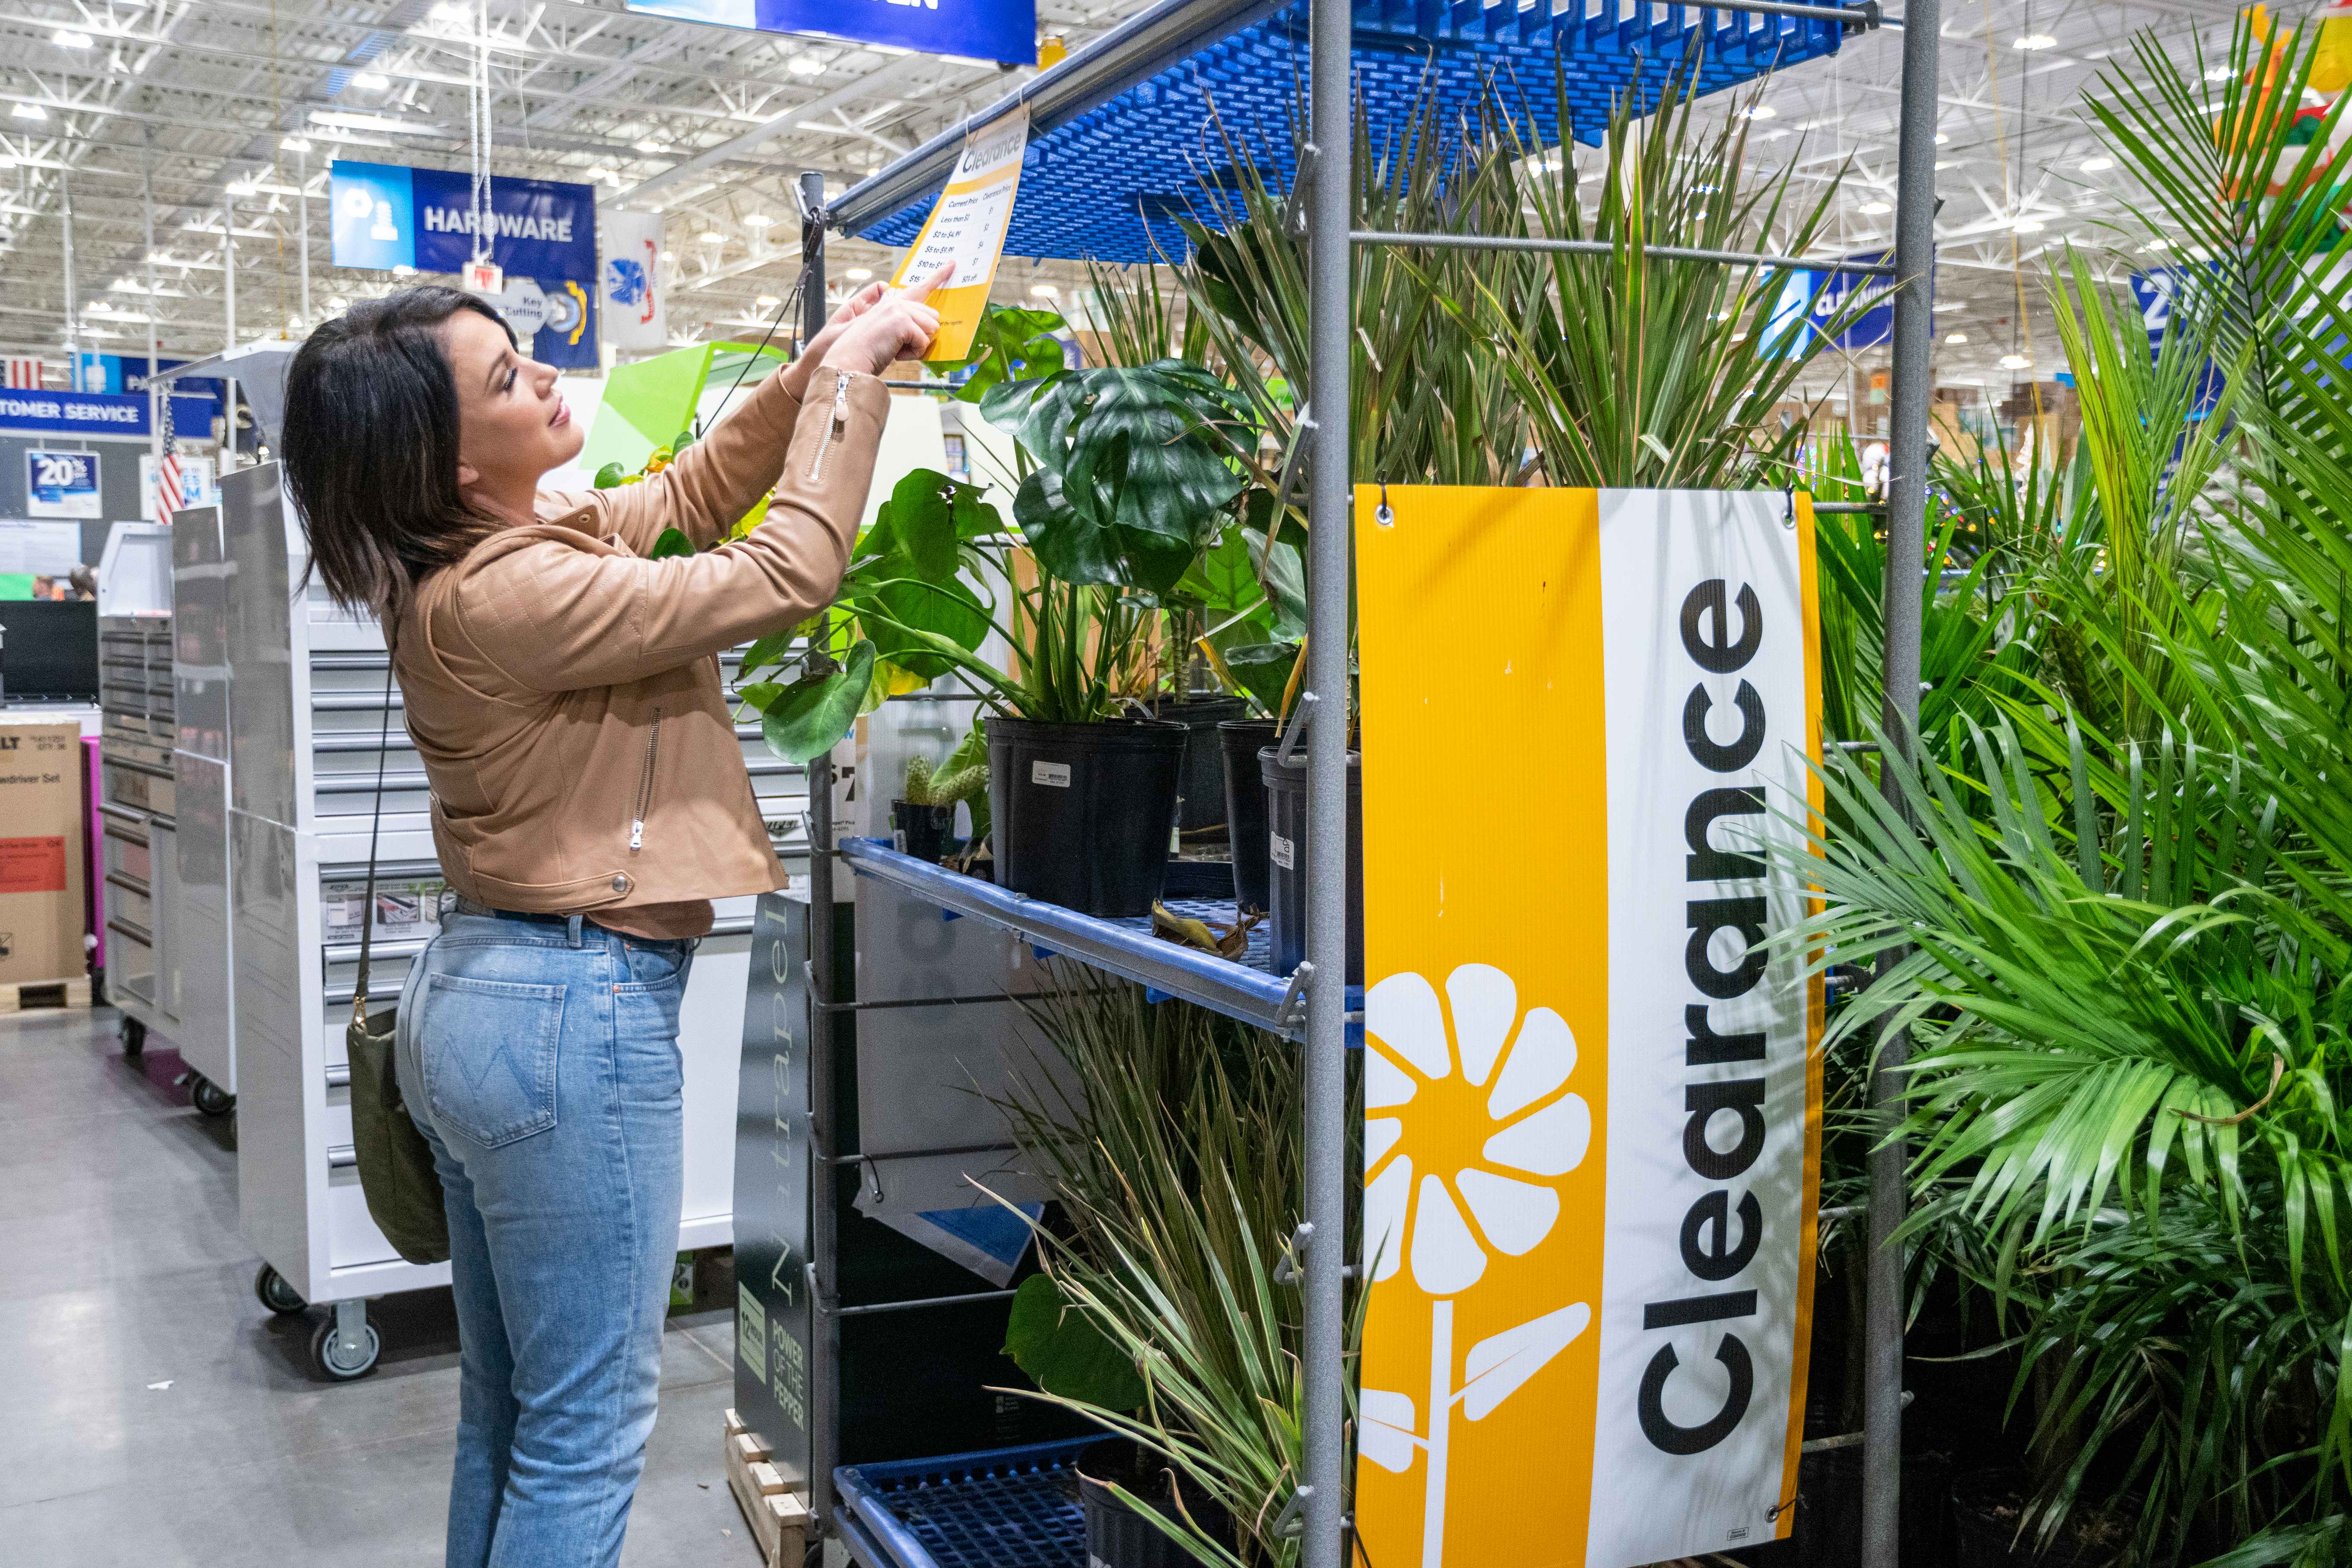 A person looking at the prices listed on a Clearance shelf of plants at Lowe's